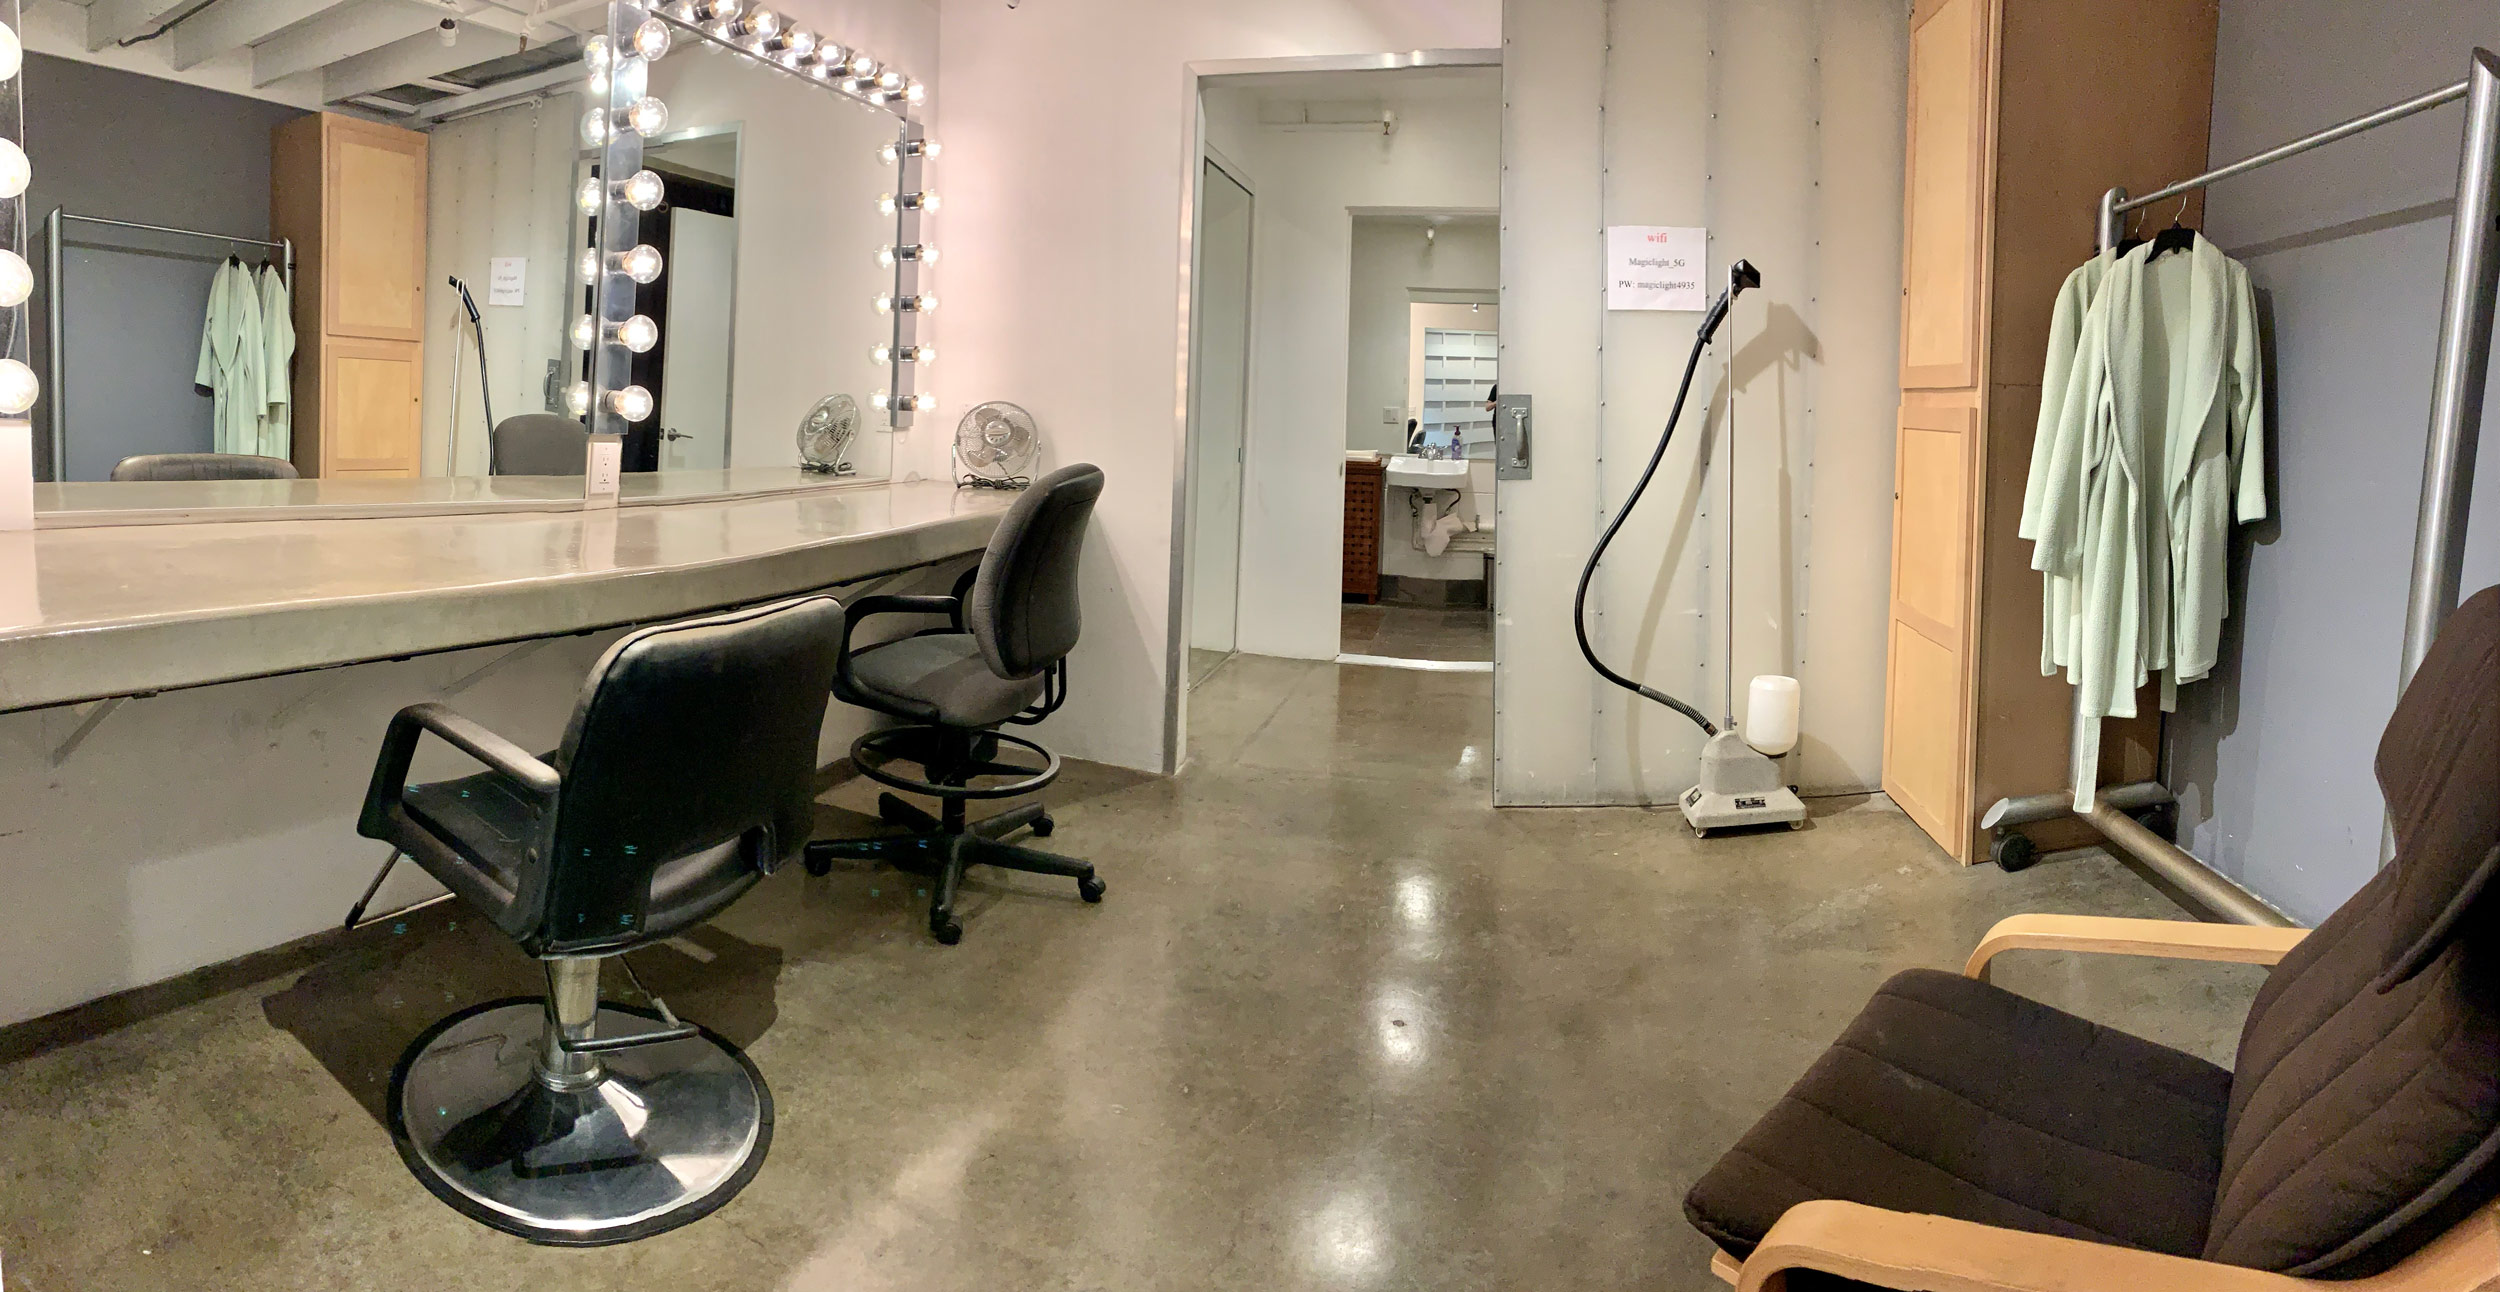 Makeup Room with dressing area and Handicap bathroom